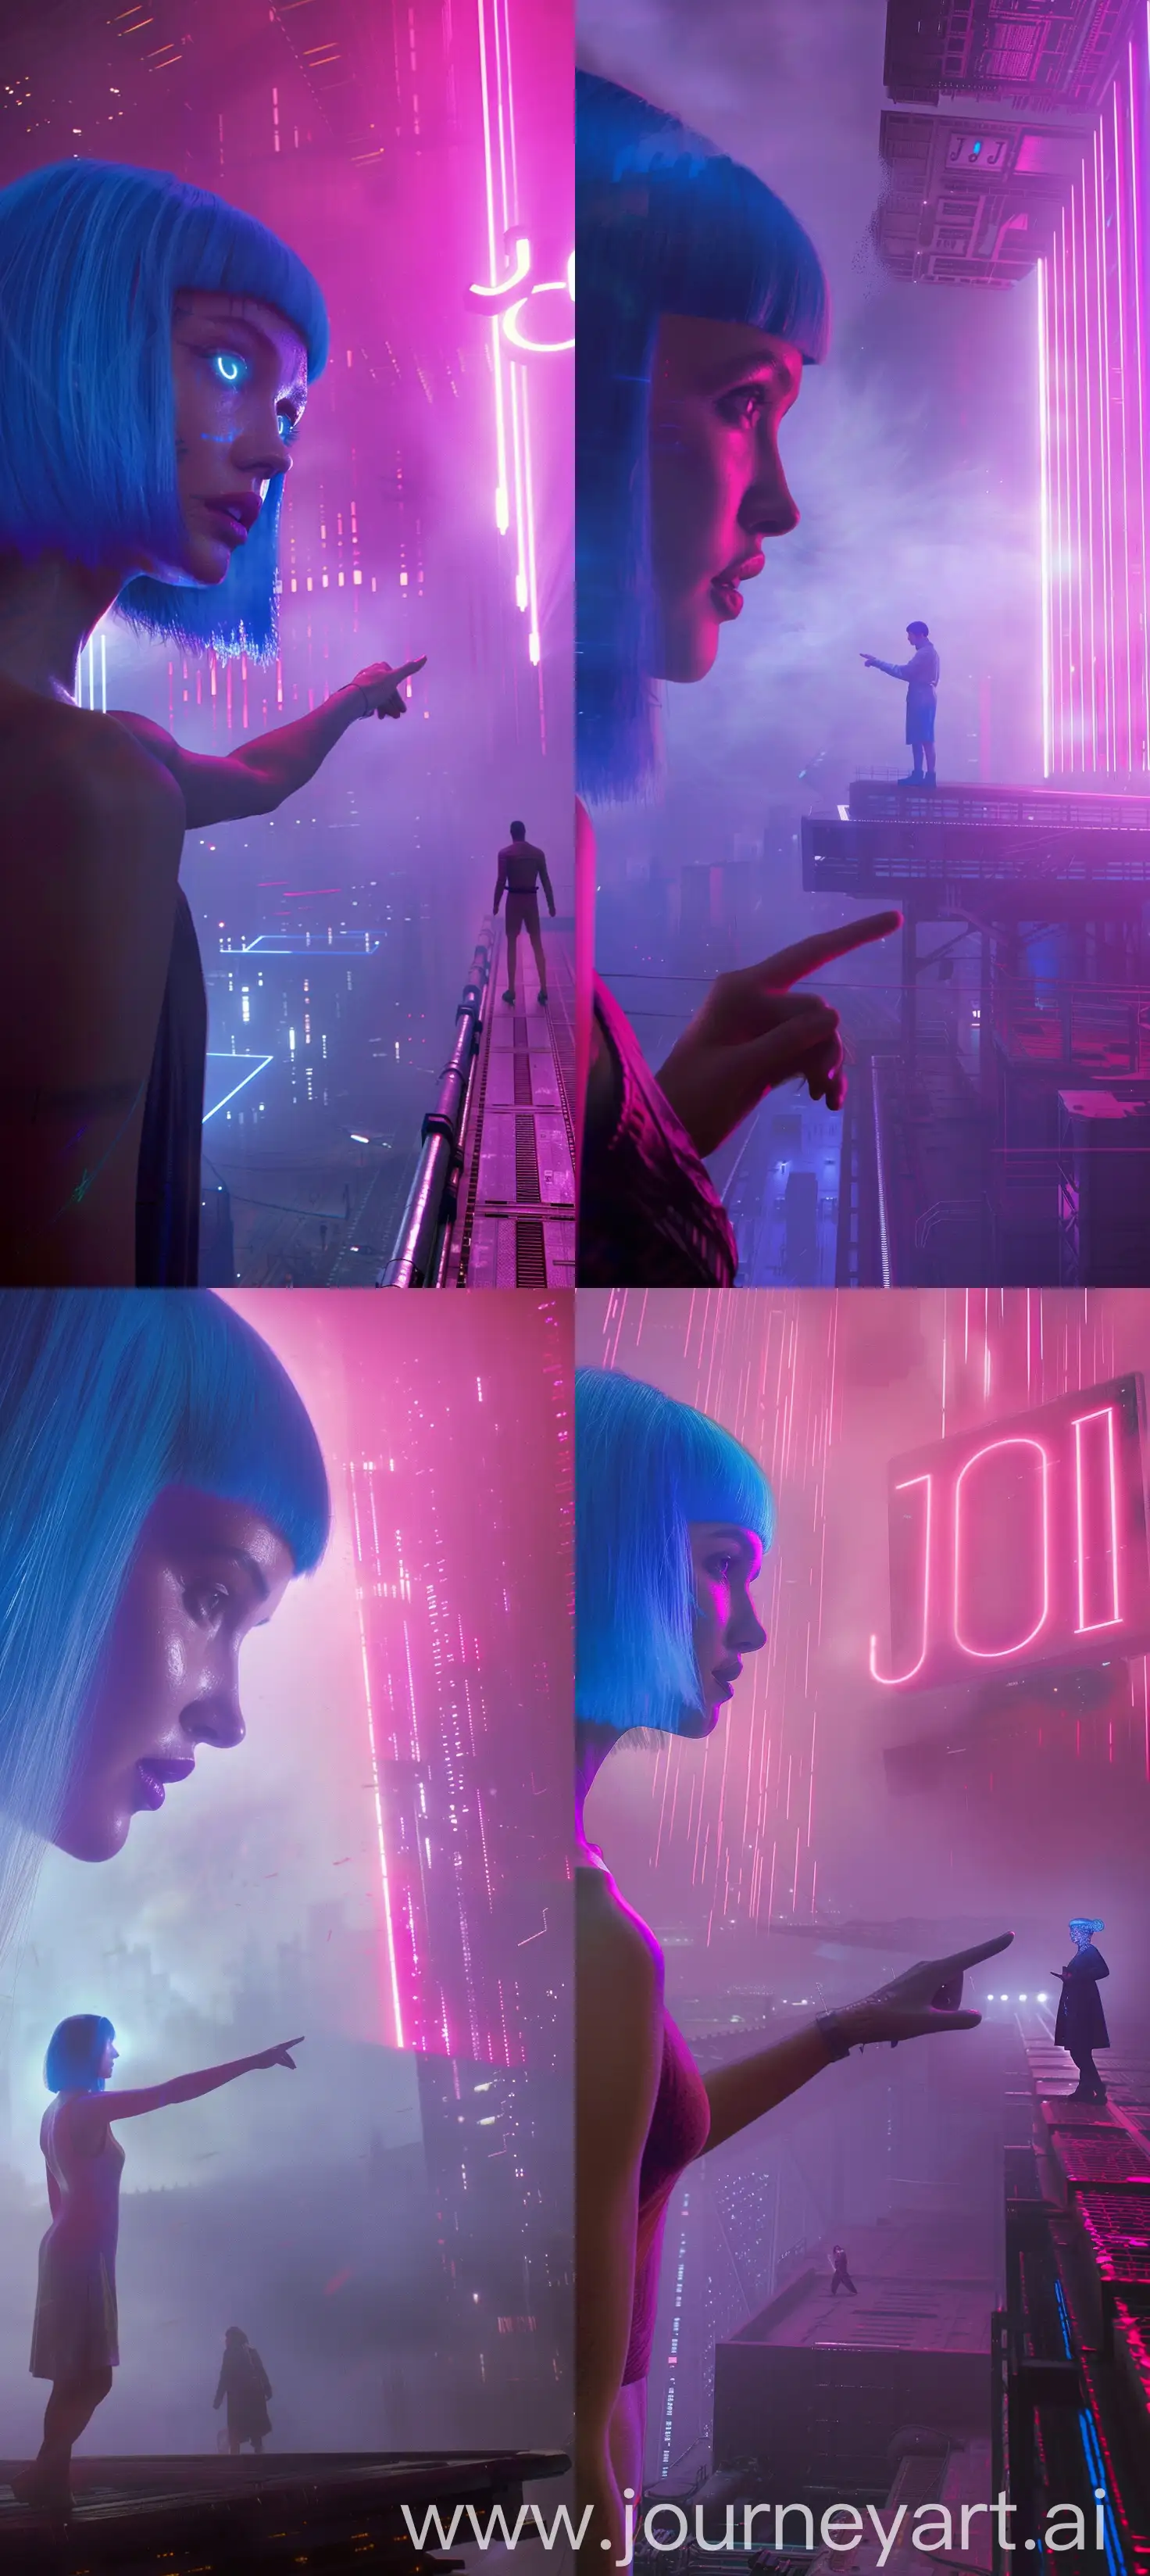 Futuristic-Cyberpunk-Scene-with-Giant-Holographic-Woman-in-Ethereal-Atmosphere